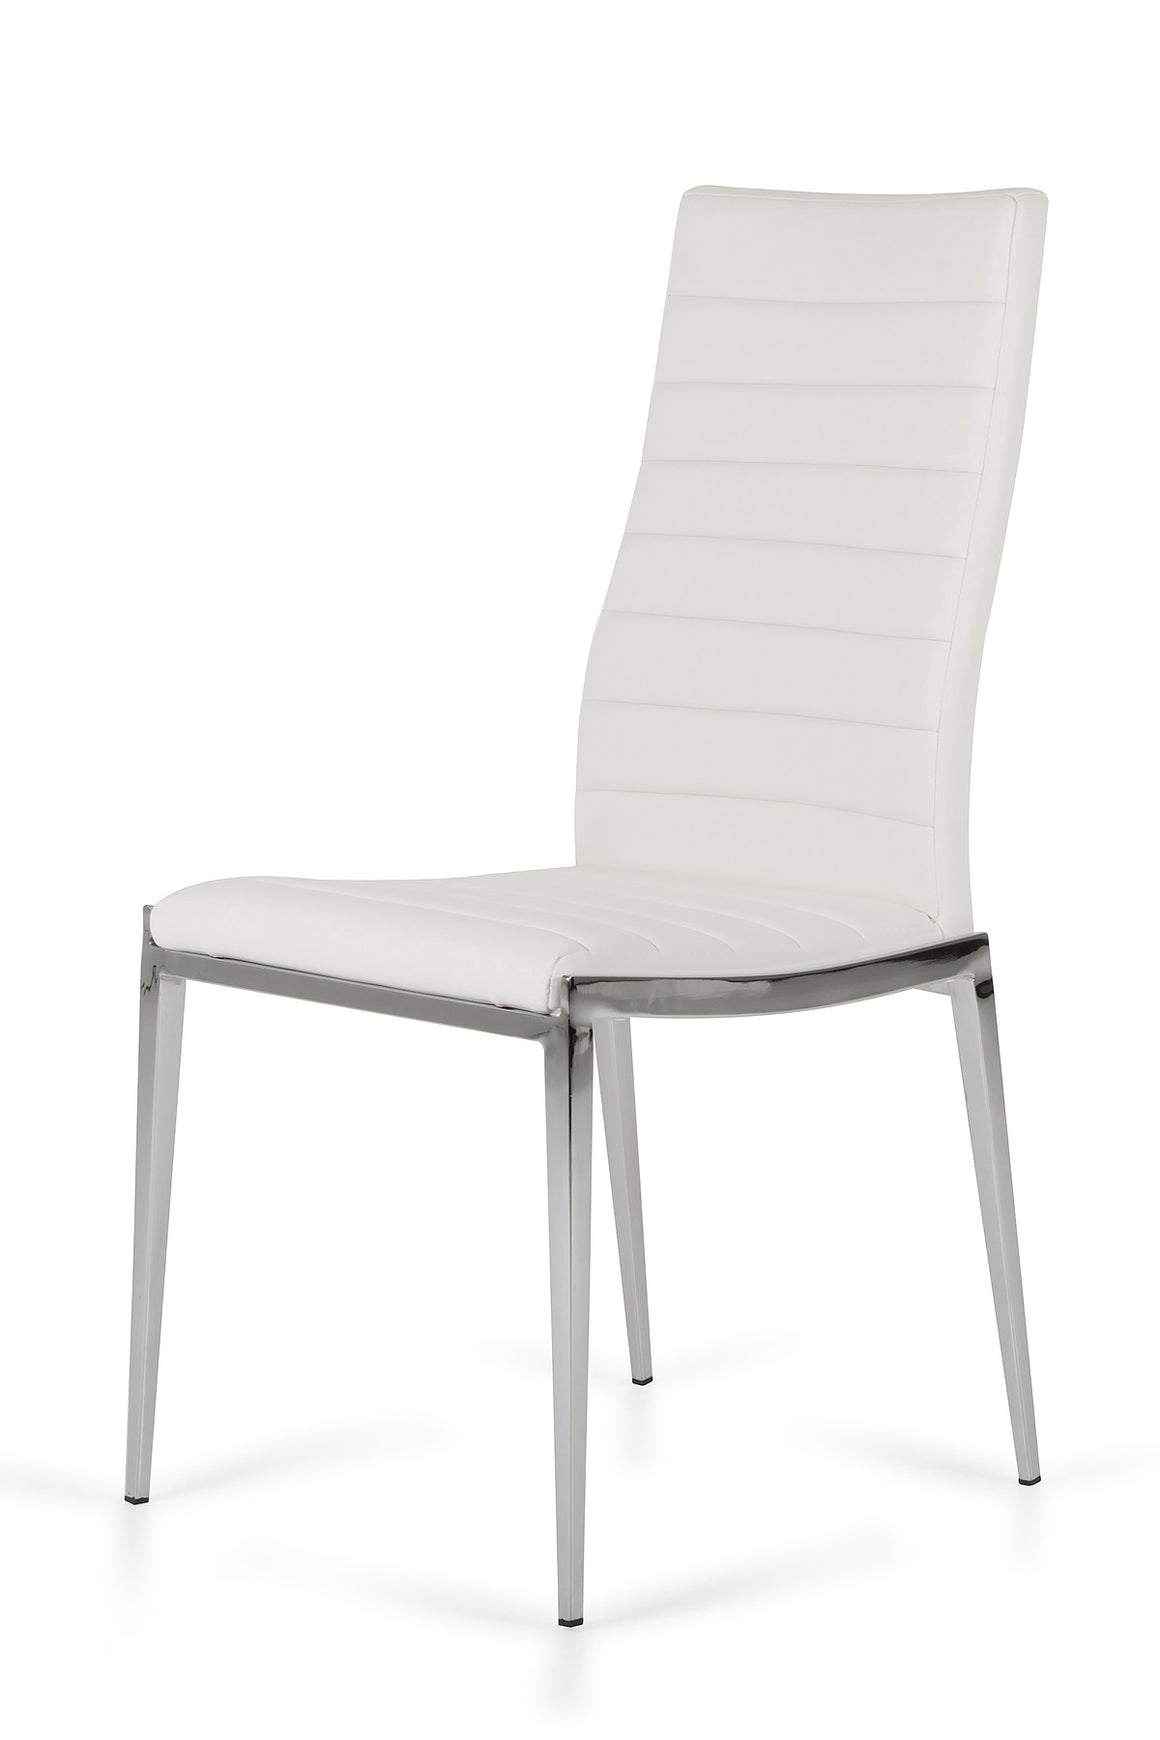 Libby - Modern White Leatherette Dining Chair (Set of 2)